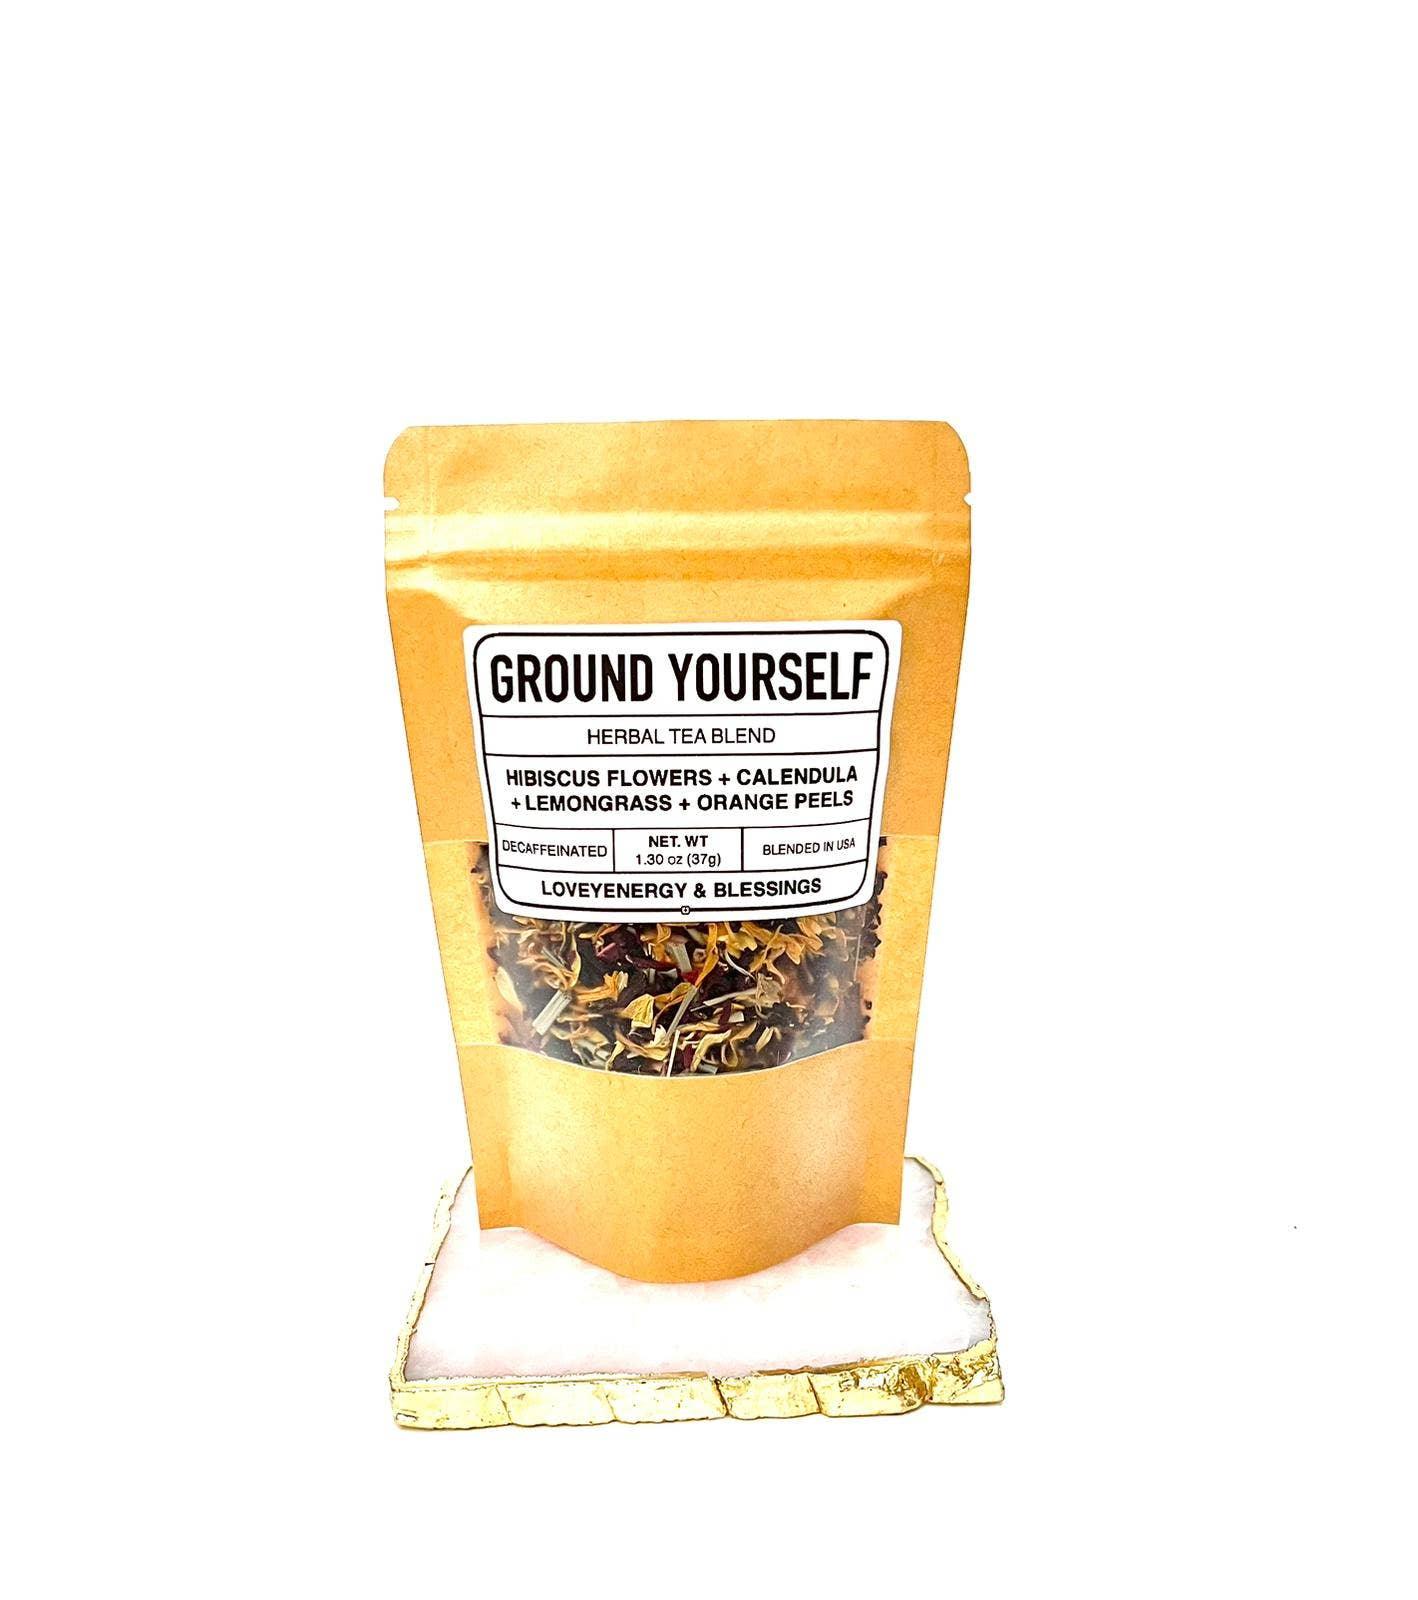 GROUND YOURSELF Handcrafted Herbal Tea Blend 13 Servings - Classic Variable